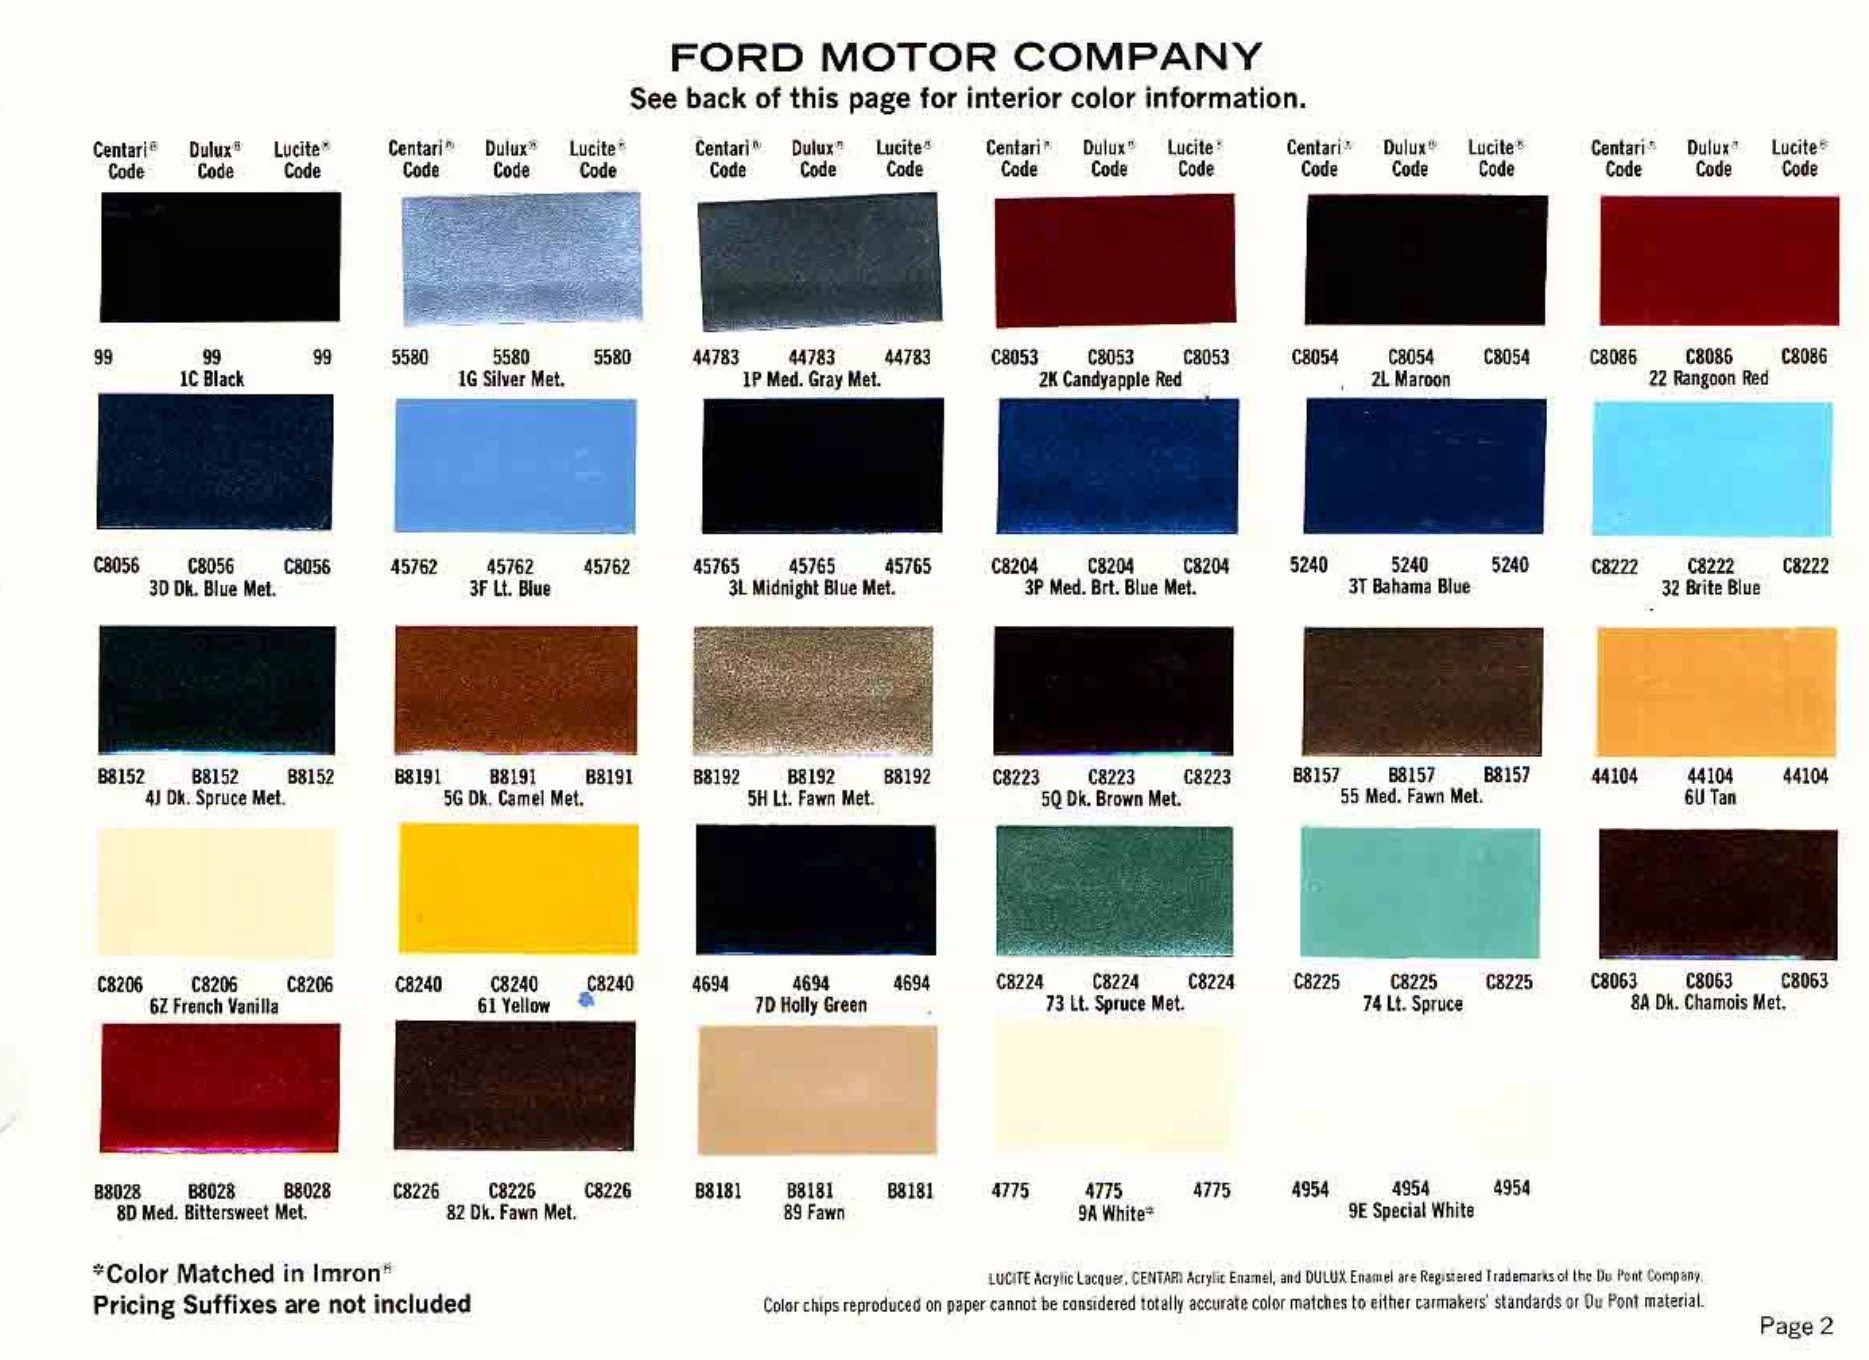 Colors, Codes and Examples used in 1982 on Ford Vehicles